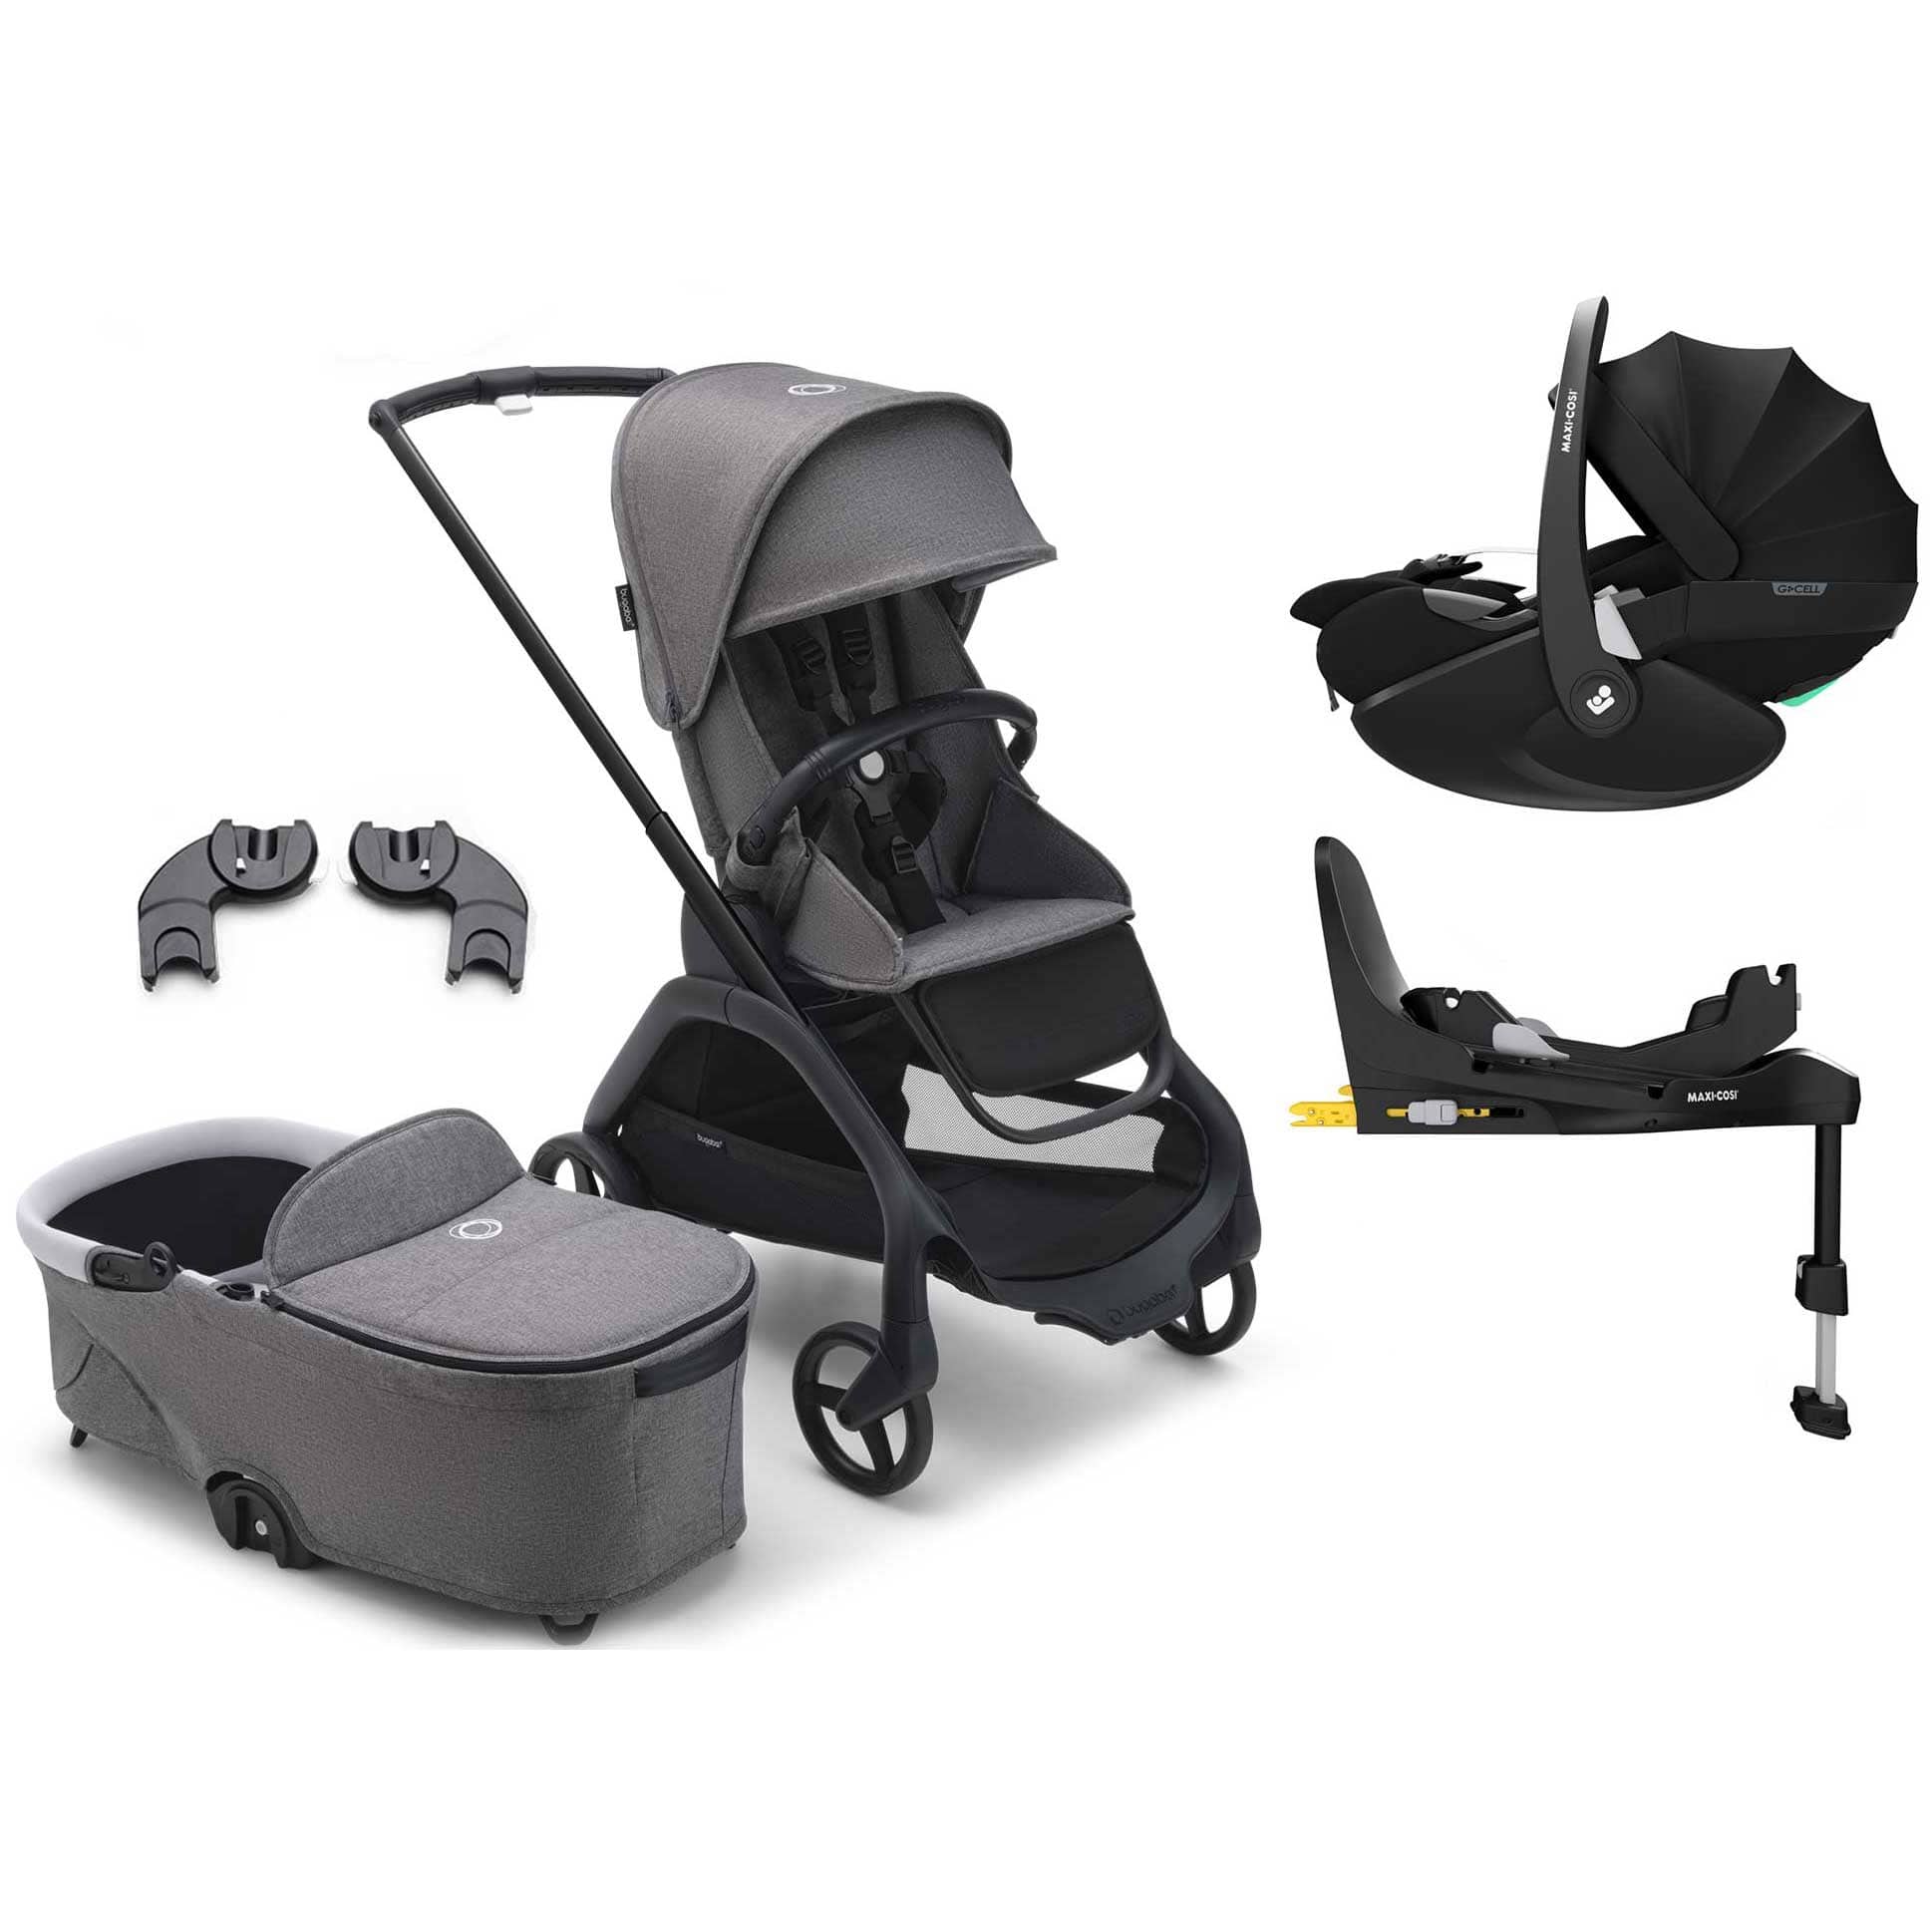 Bugaboo Travel Systems Bugaboo Dragonfly Pebble 360 Pro Travel System in Graphite/Grey Melange 13815-GRA-GRE-MEL